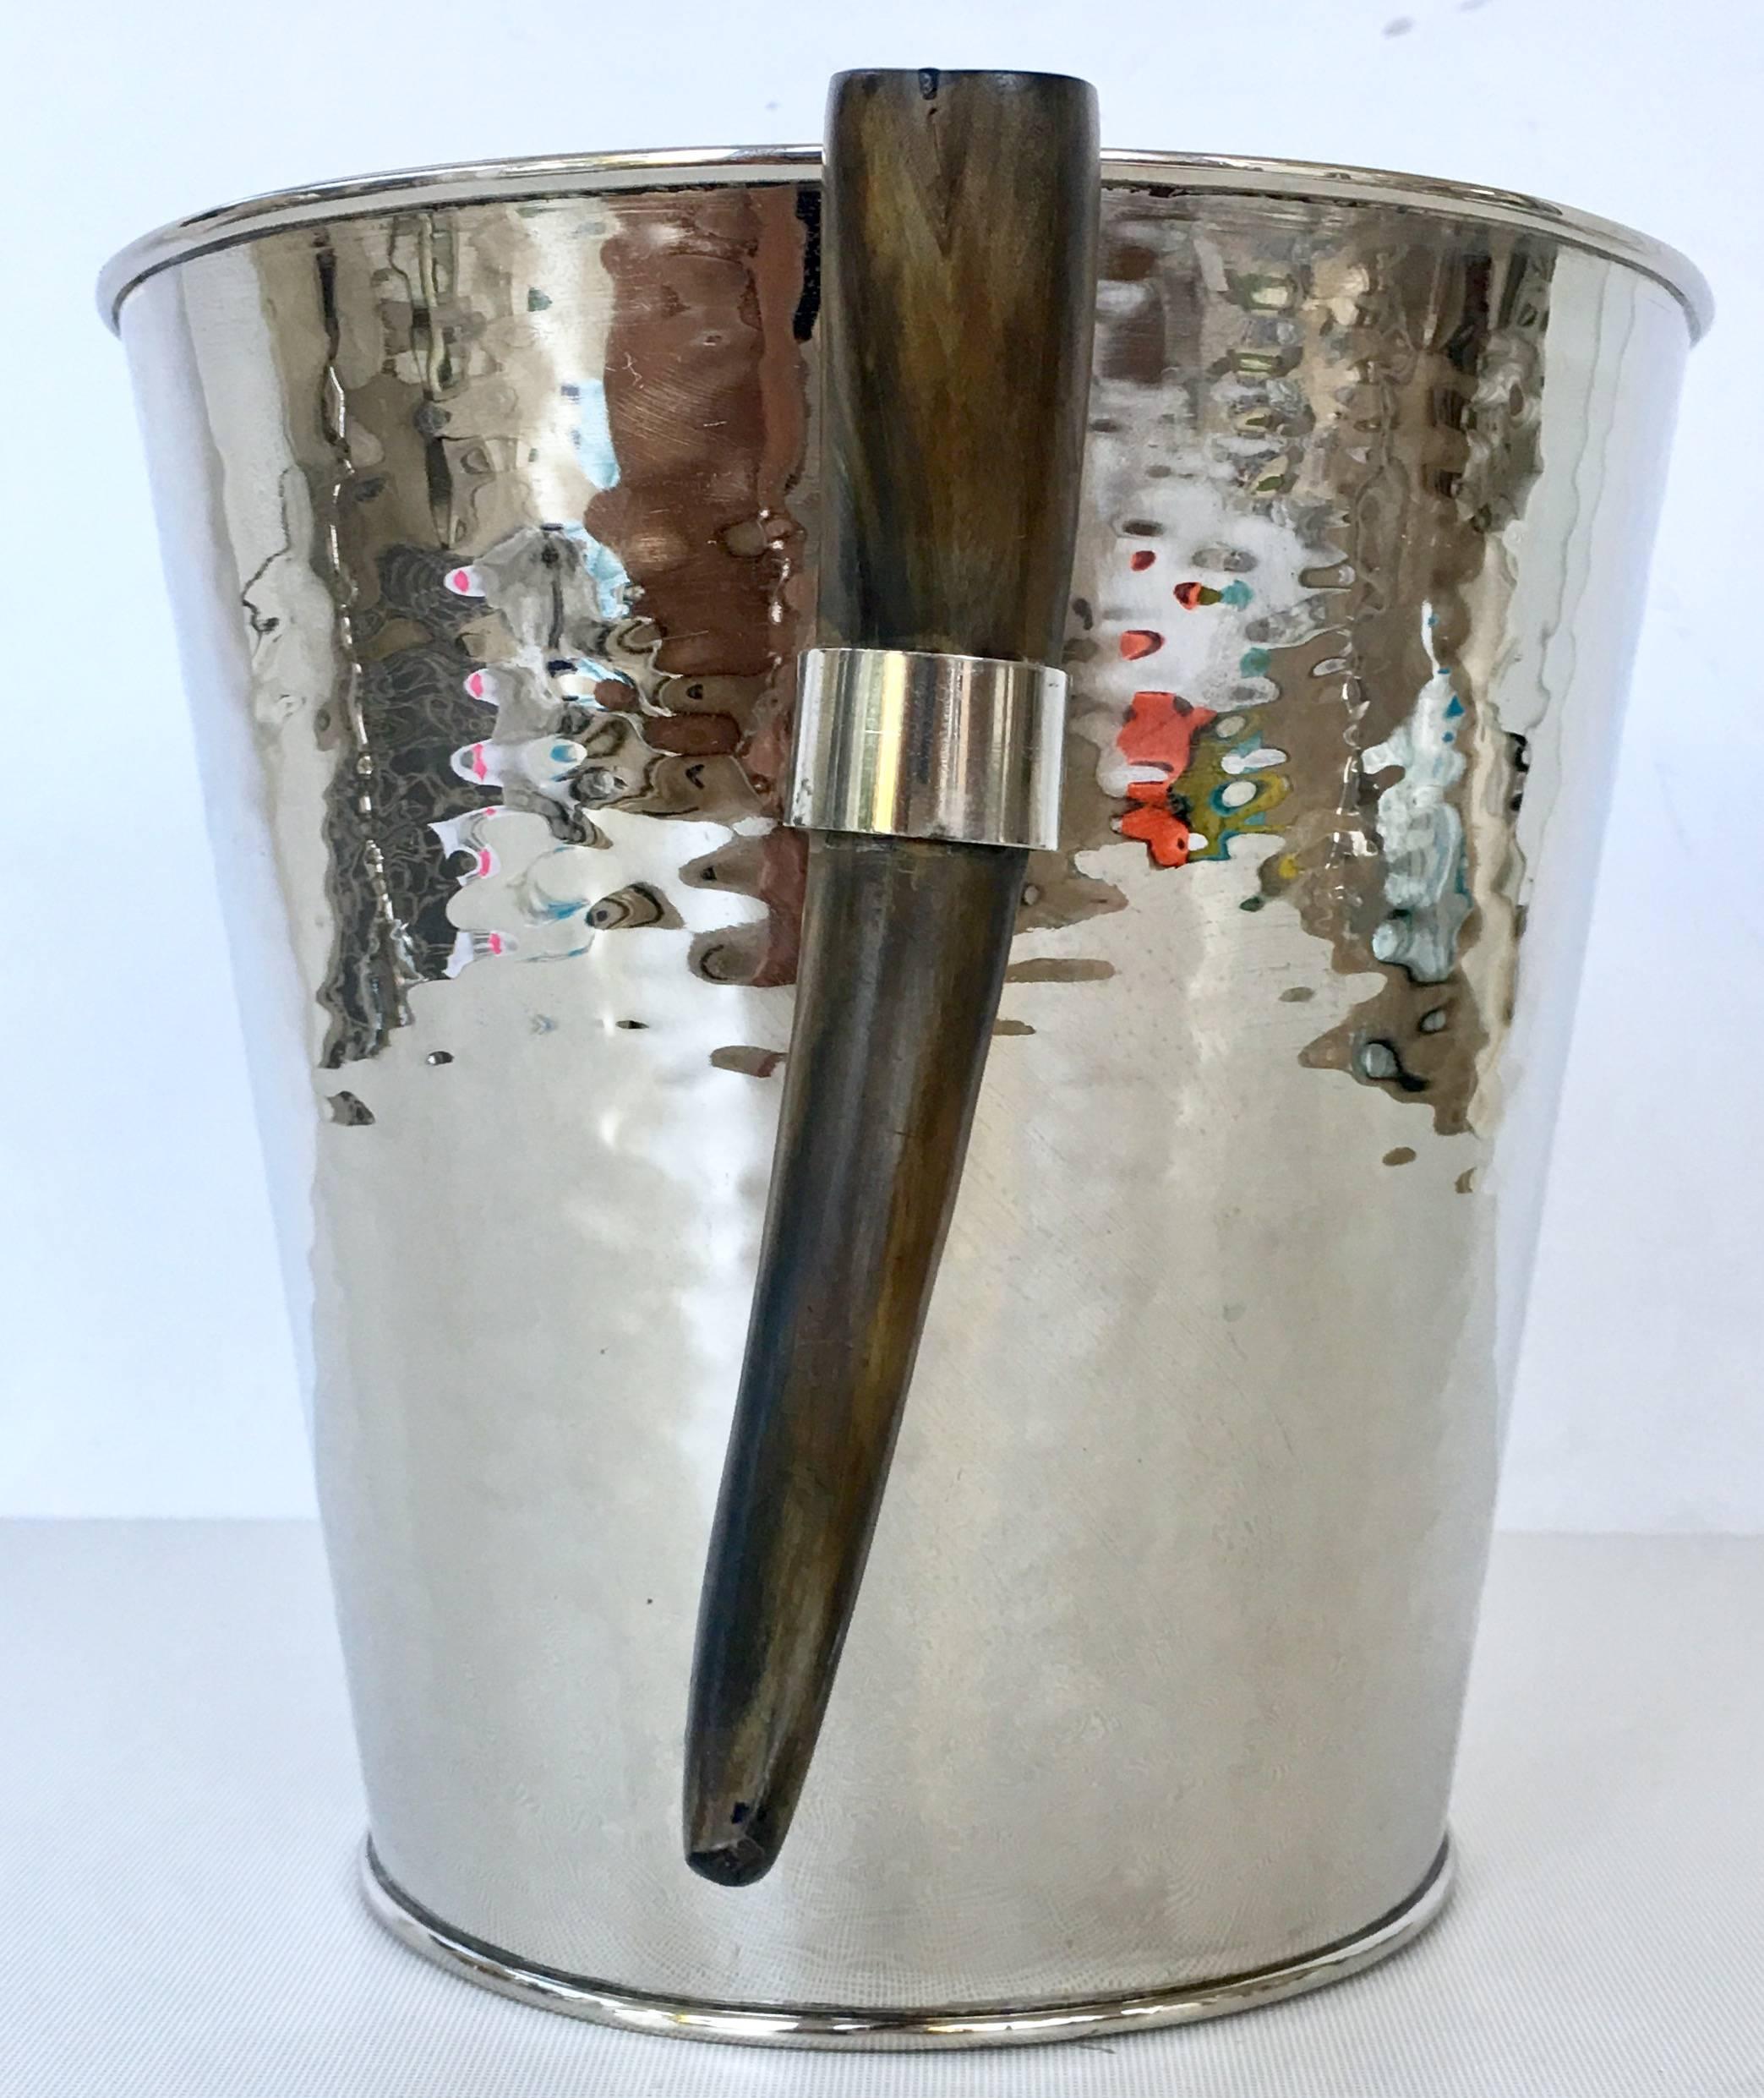 Contemporary & Modern hammered silver plate and Horn handle champagne or ice bucket.
New, floor sample.